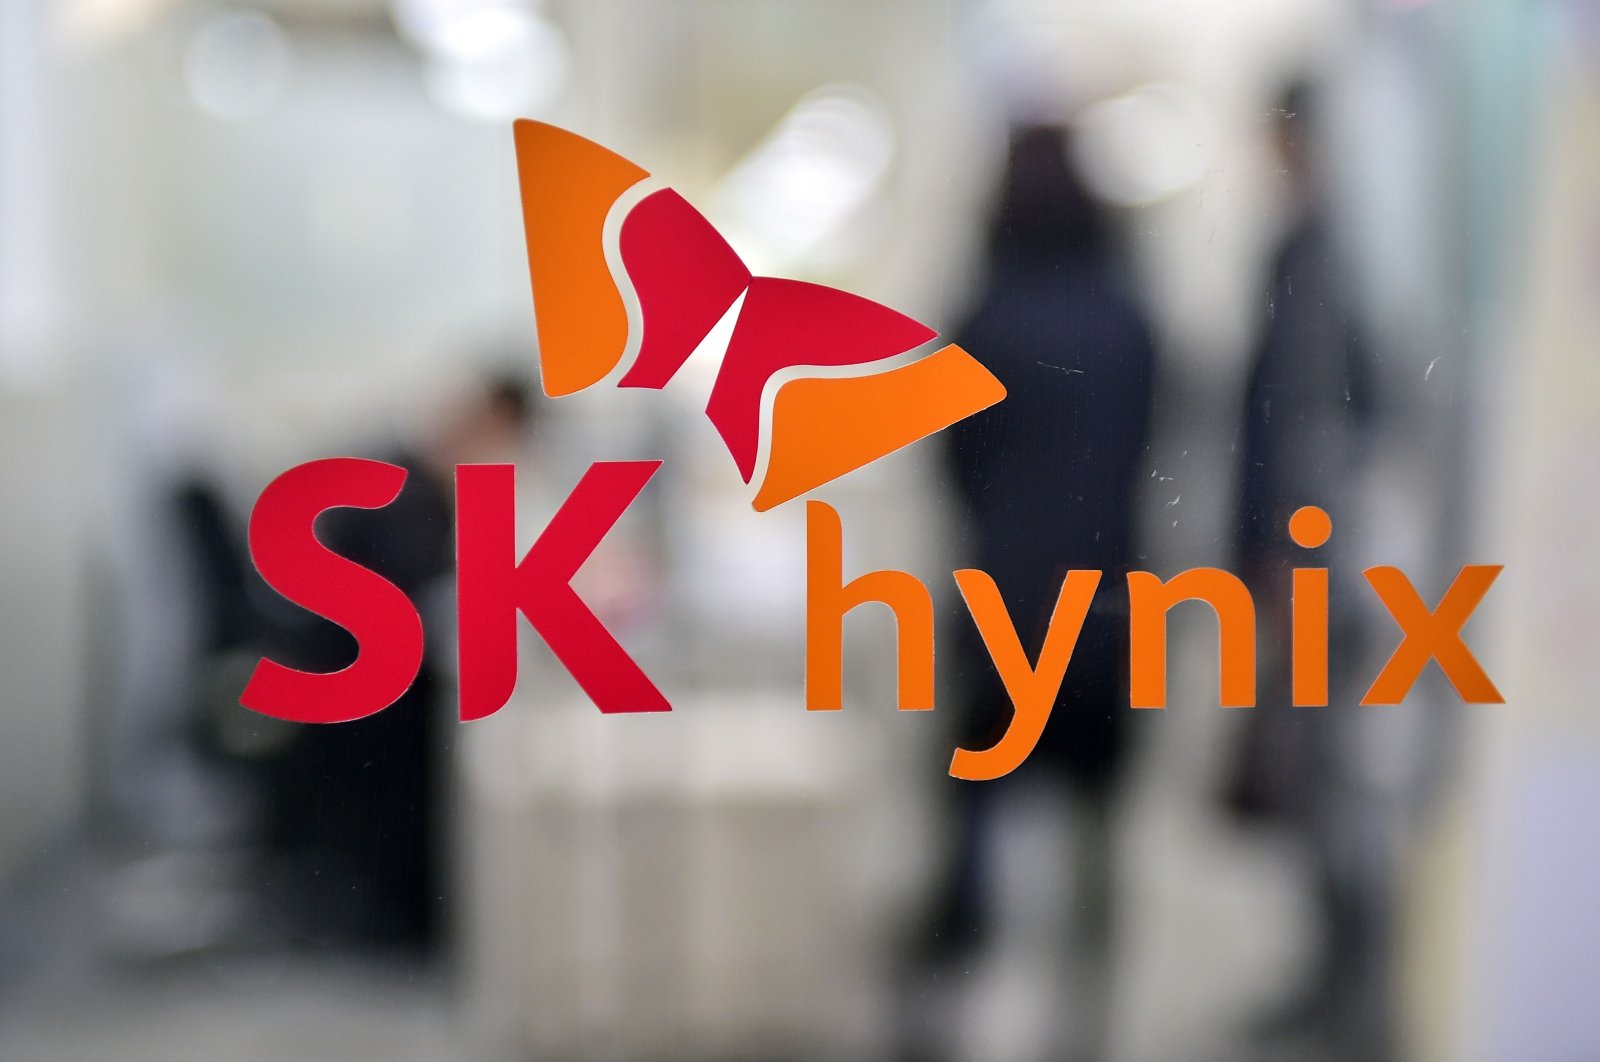 The logo of South Korean chipmaker SK Hynix displayed on a glass door at a branch in Seoul, South Korea, Jan. 28, 2015. (AFP Photo)